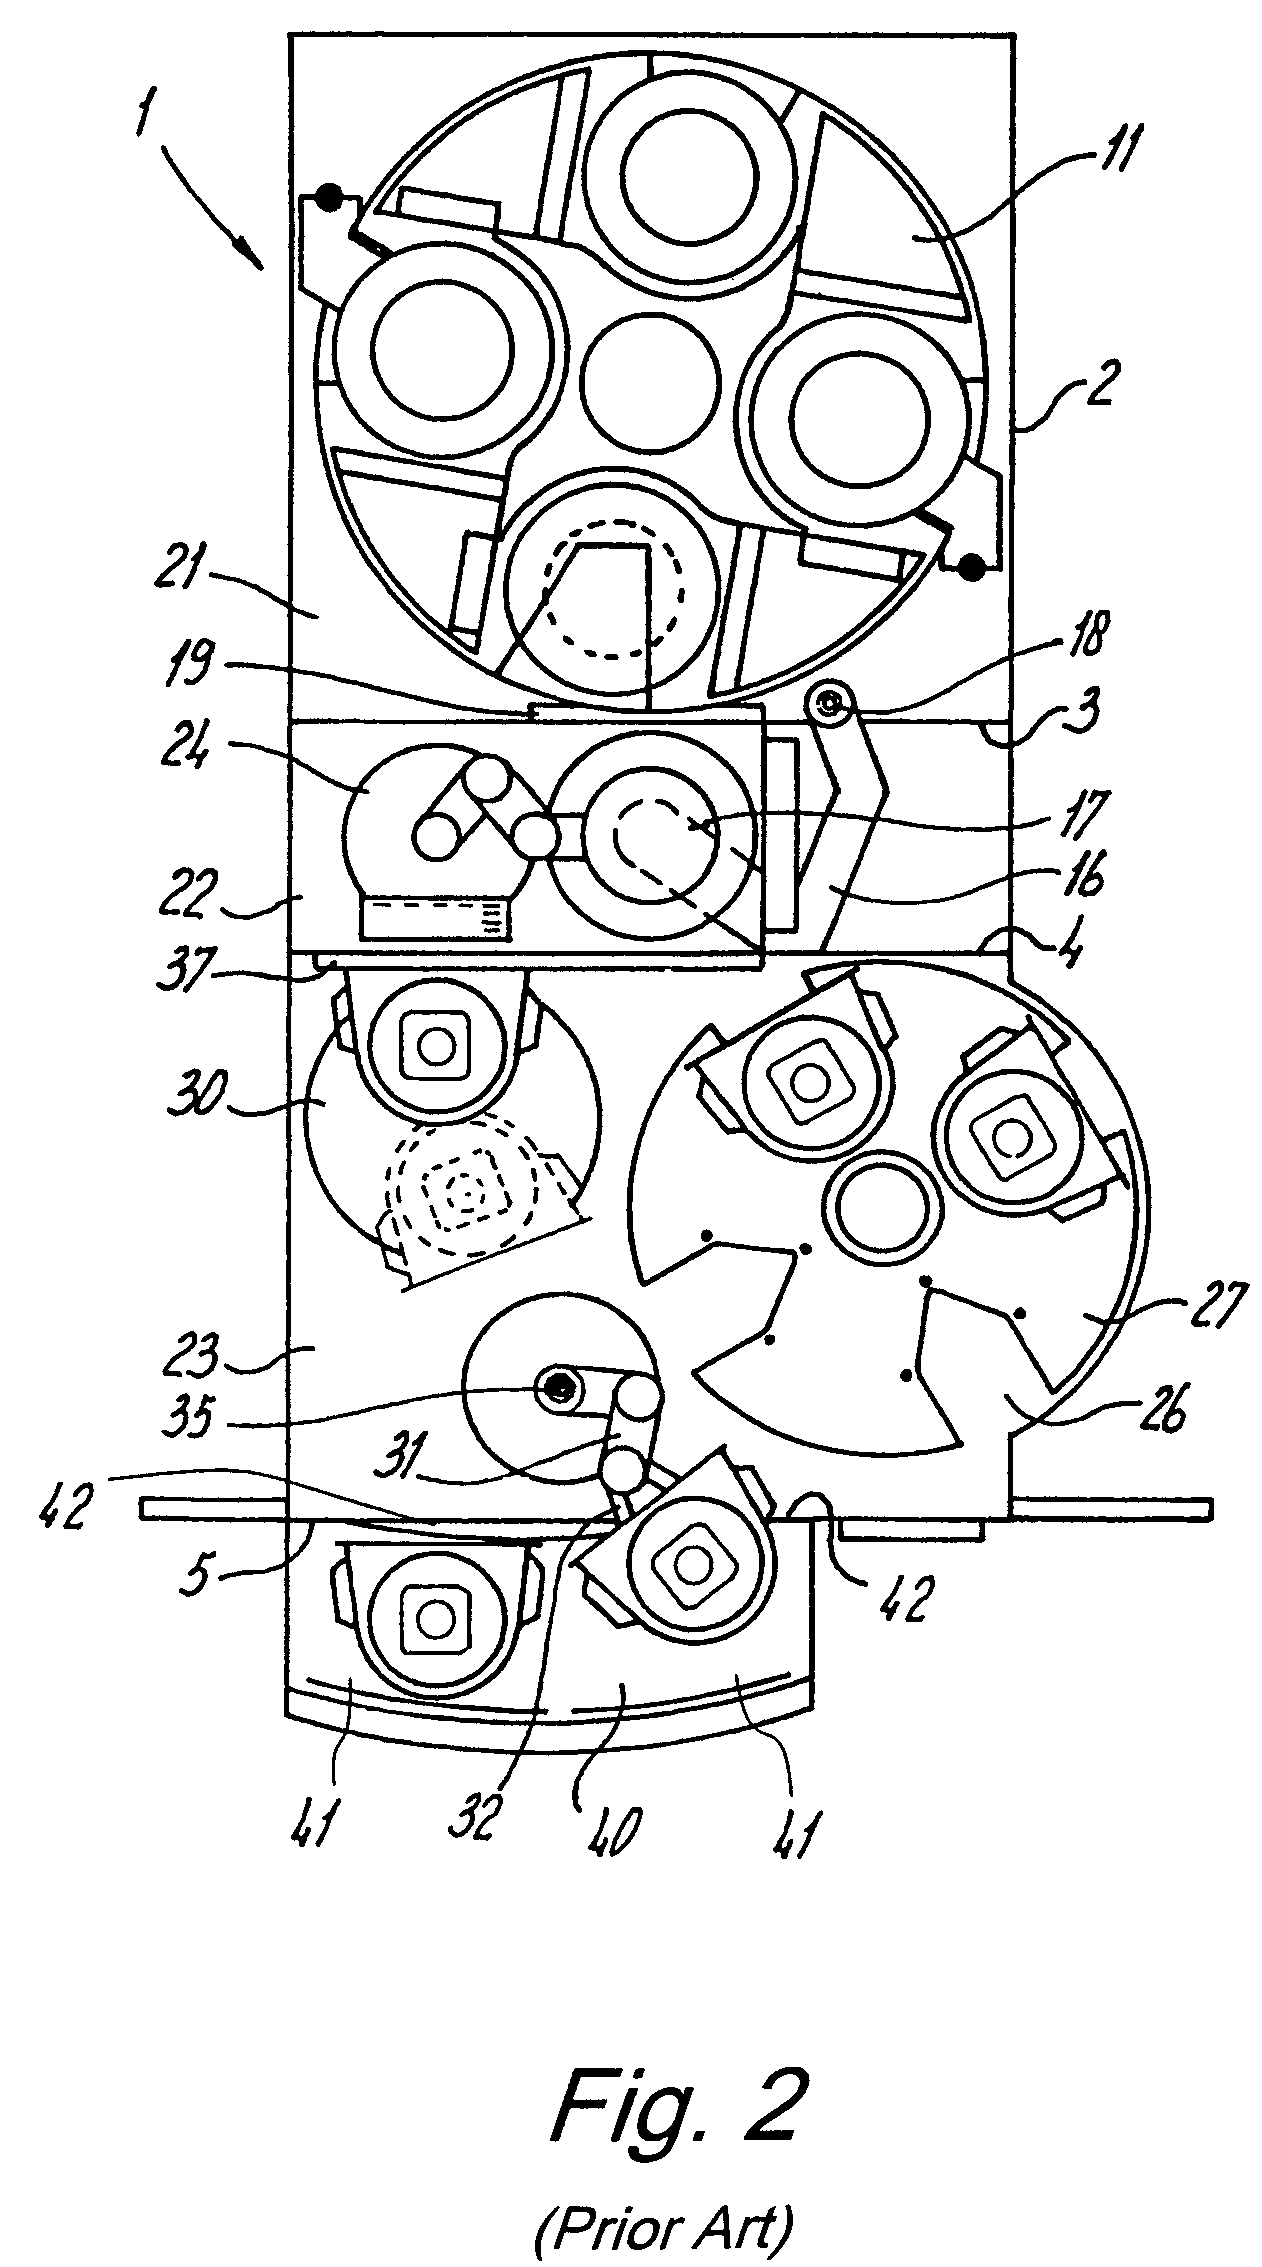 Processing system with increased cassette storage capacity